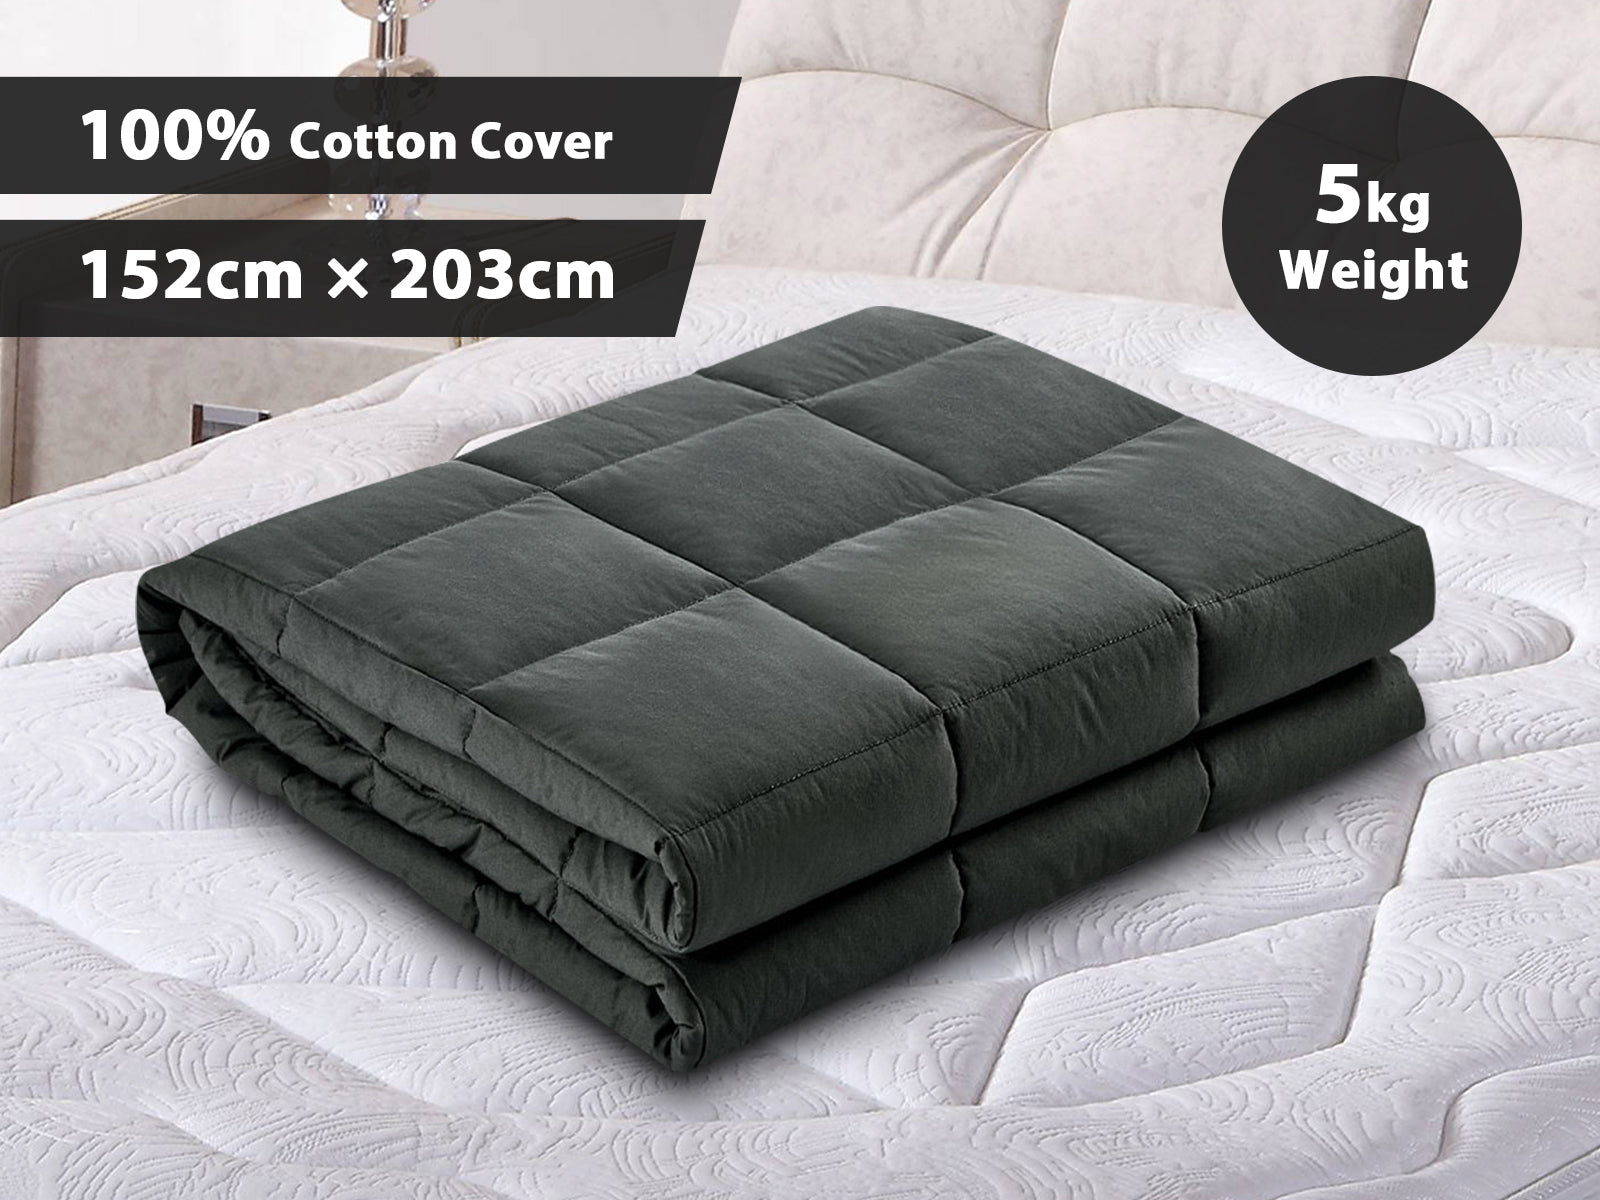 Weighted Blanket 5KG